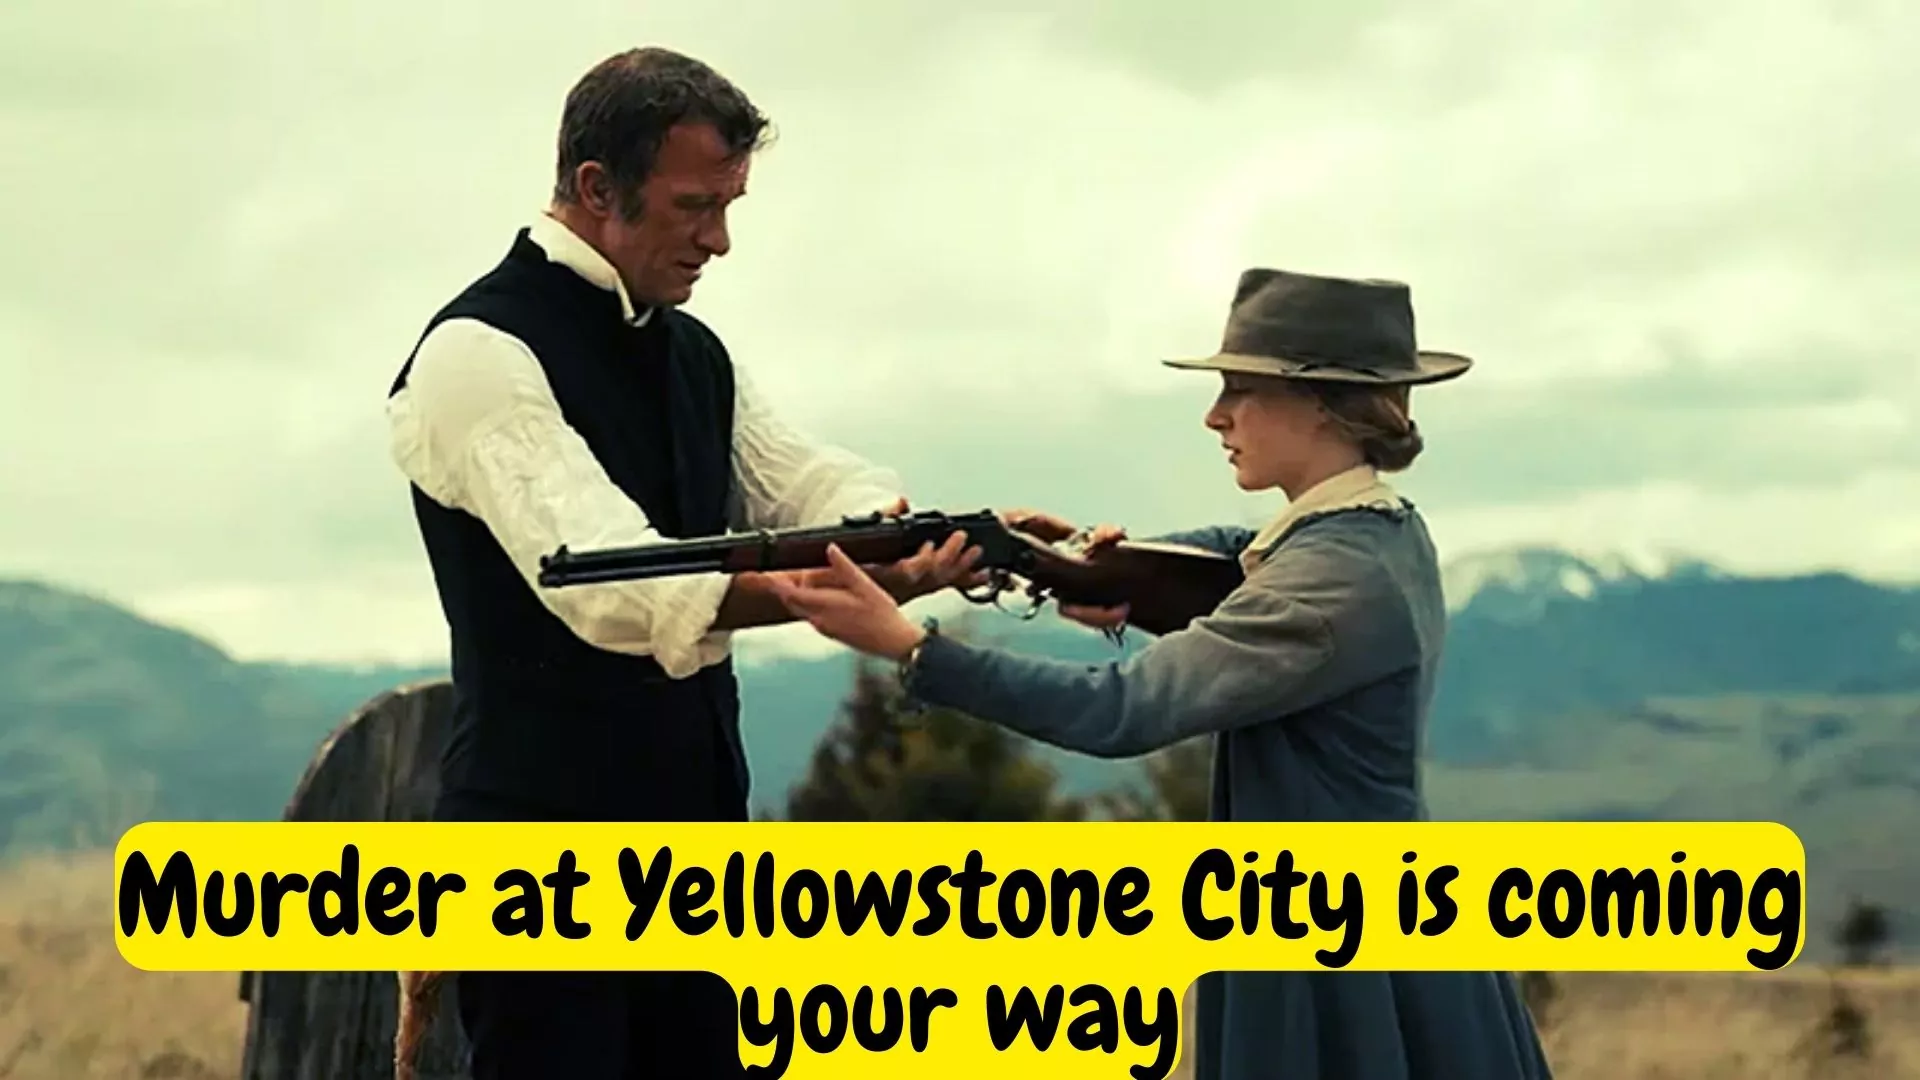 Murder at Yellowstone City is coming your way